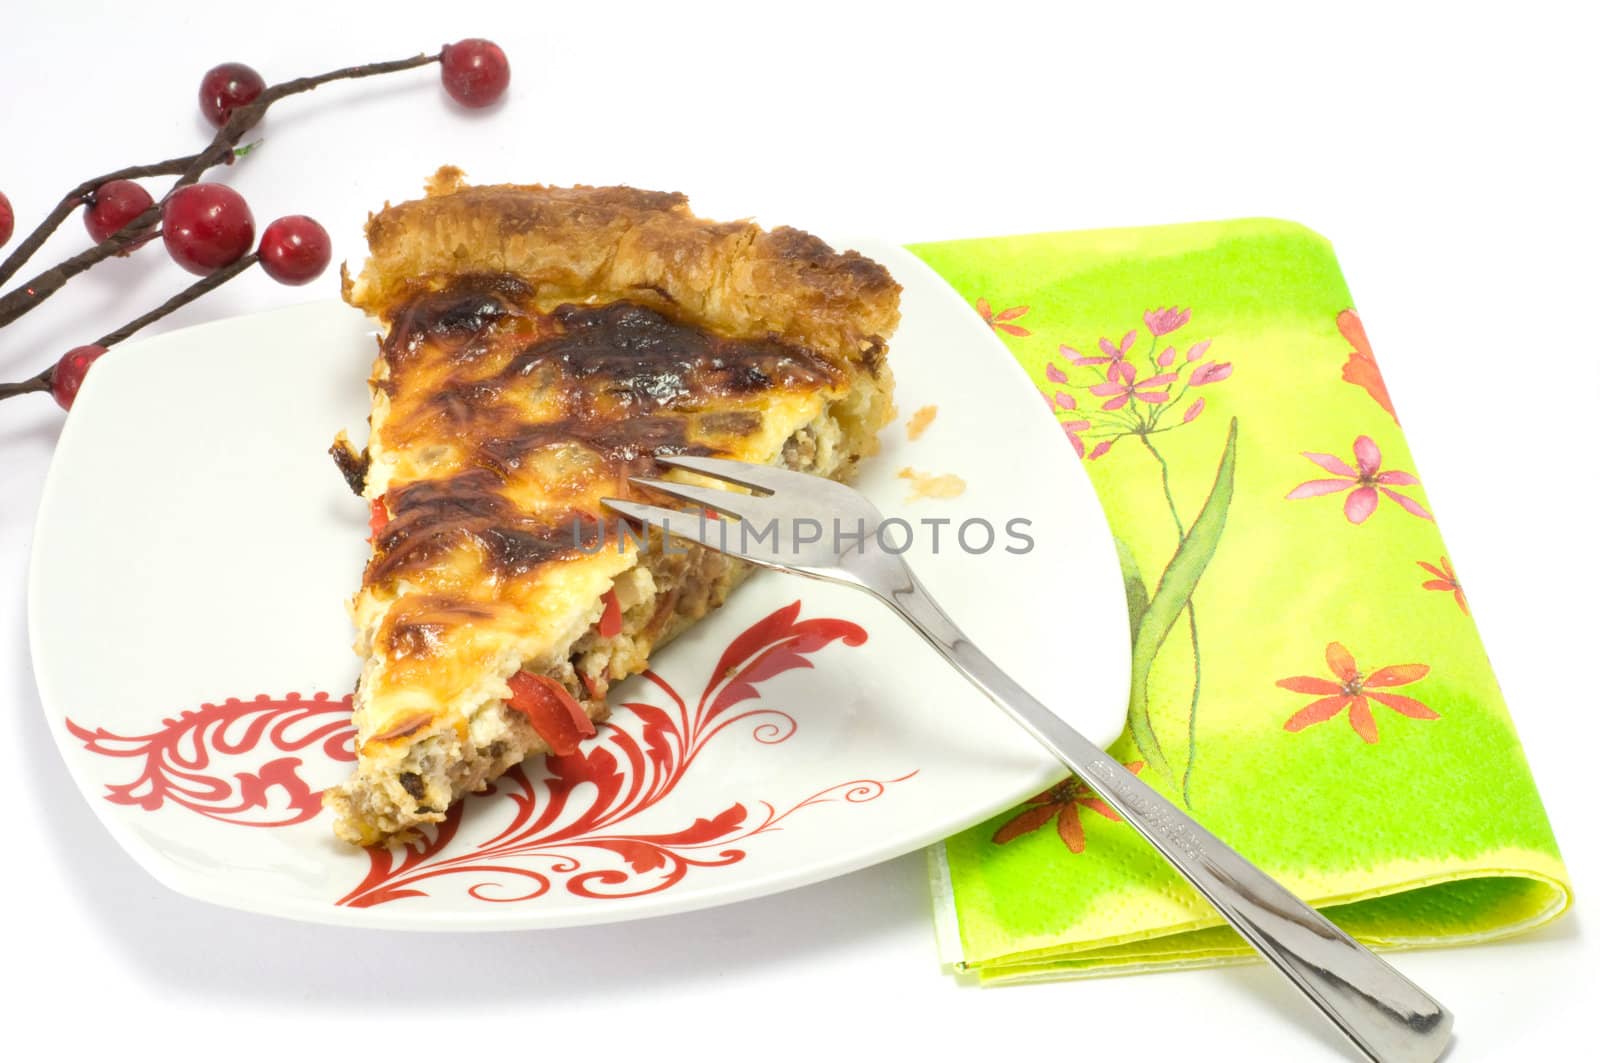 Asparagus quiche with meat baked to perfection